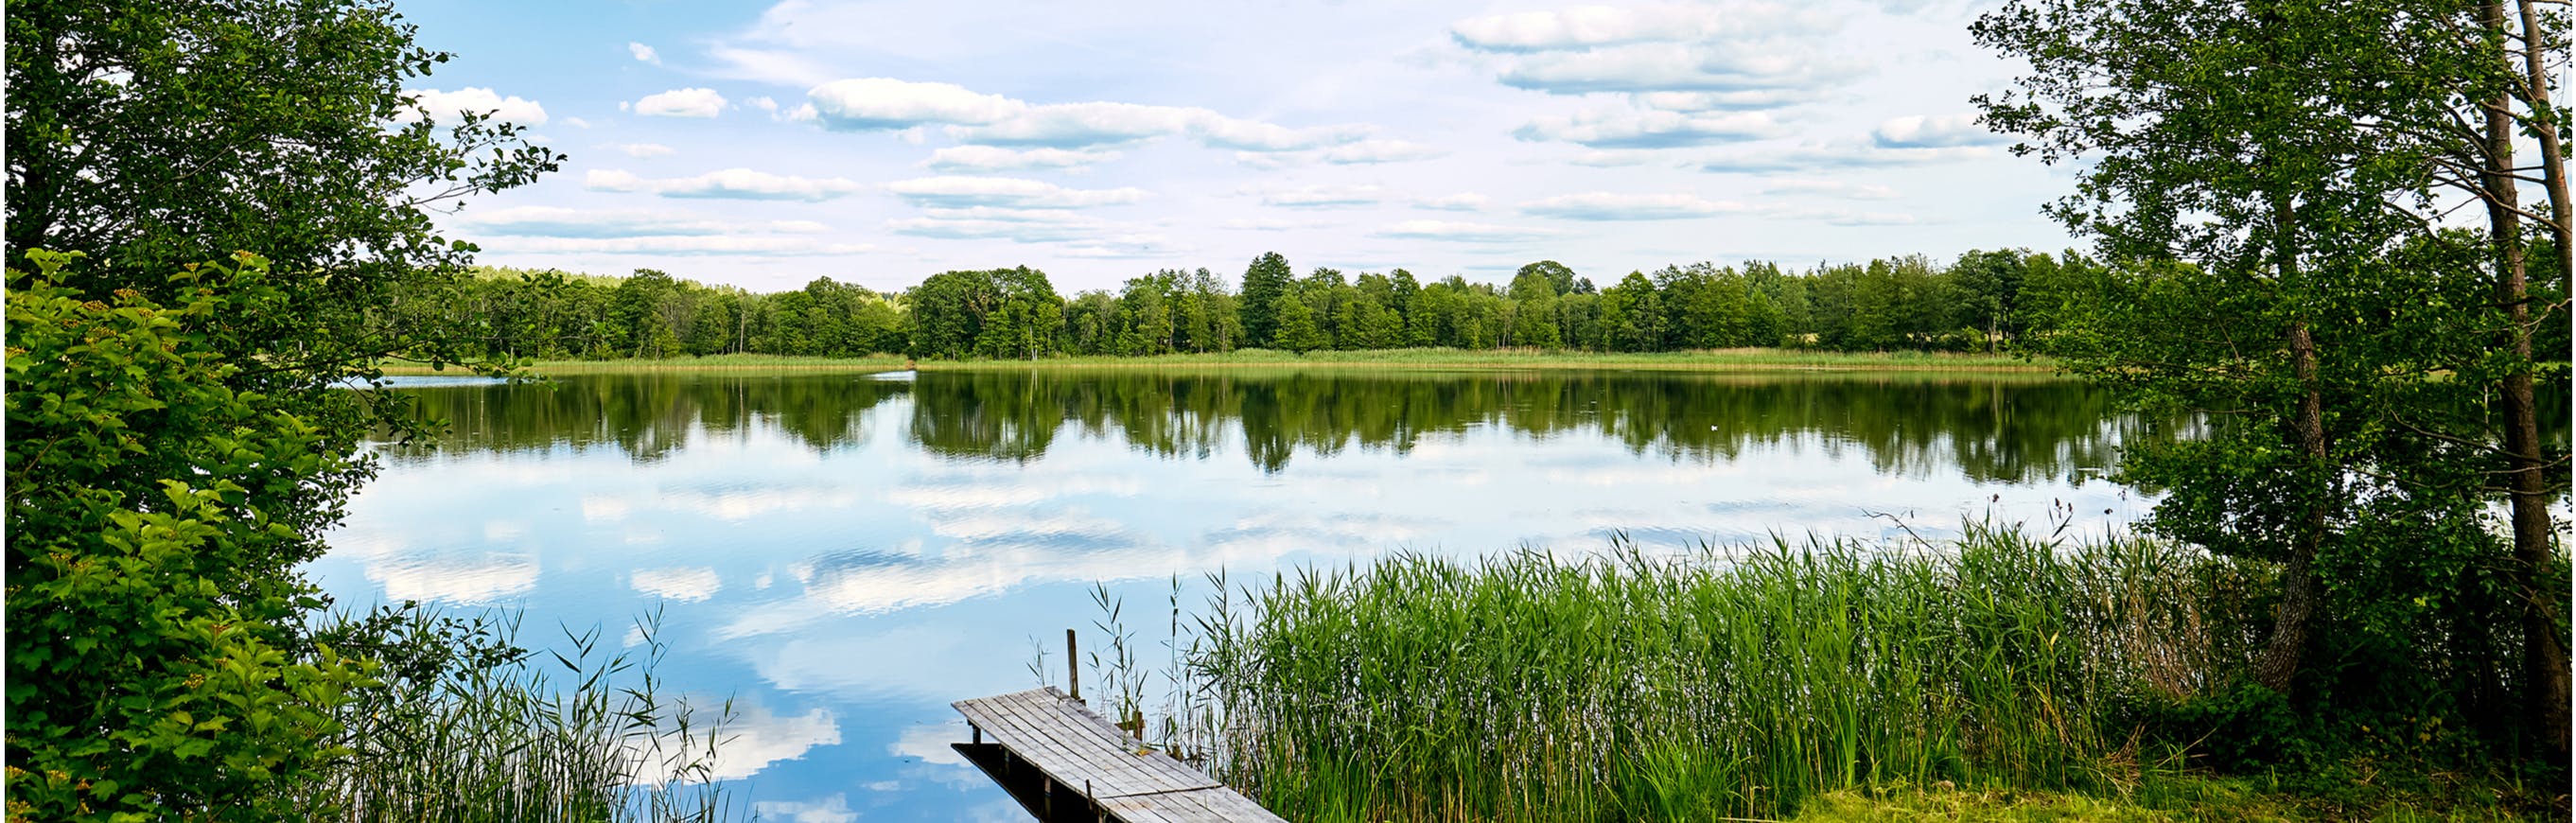 dock on a lake with blue skies and green trees